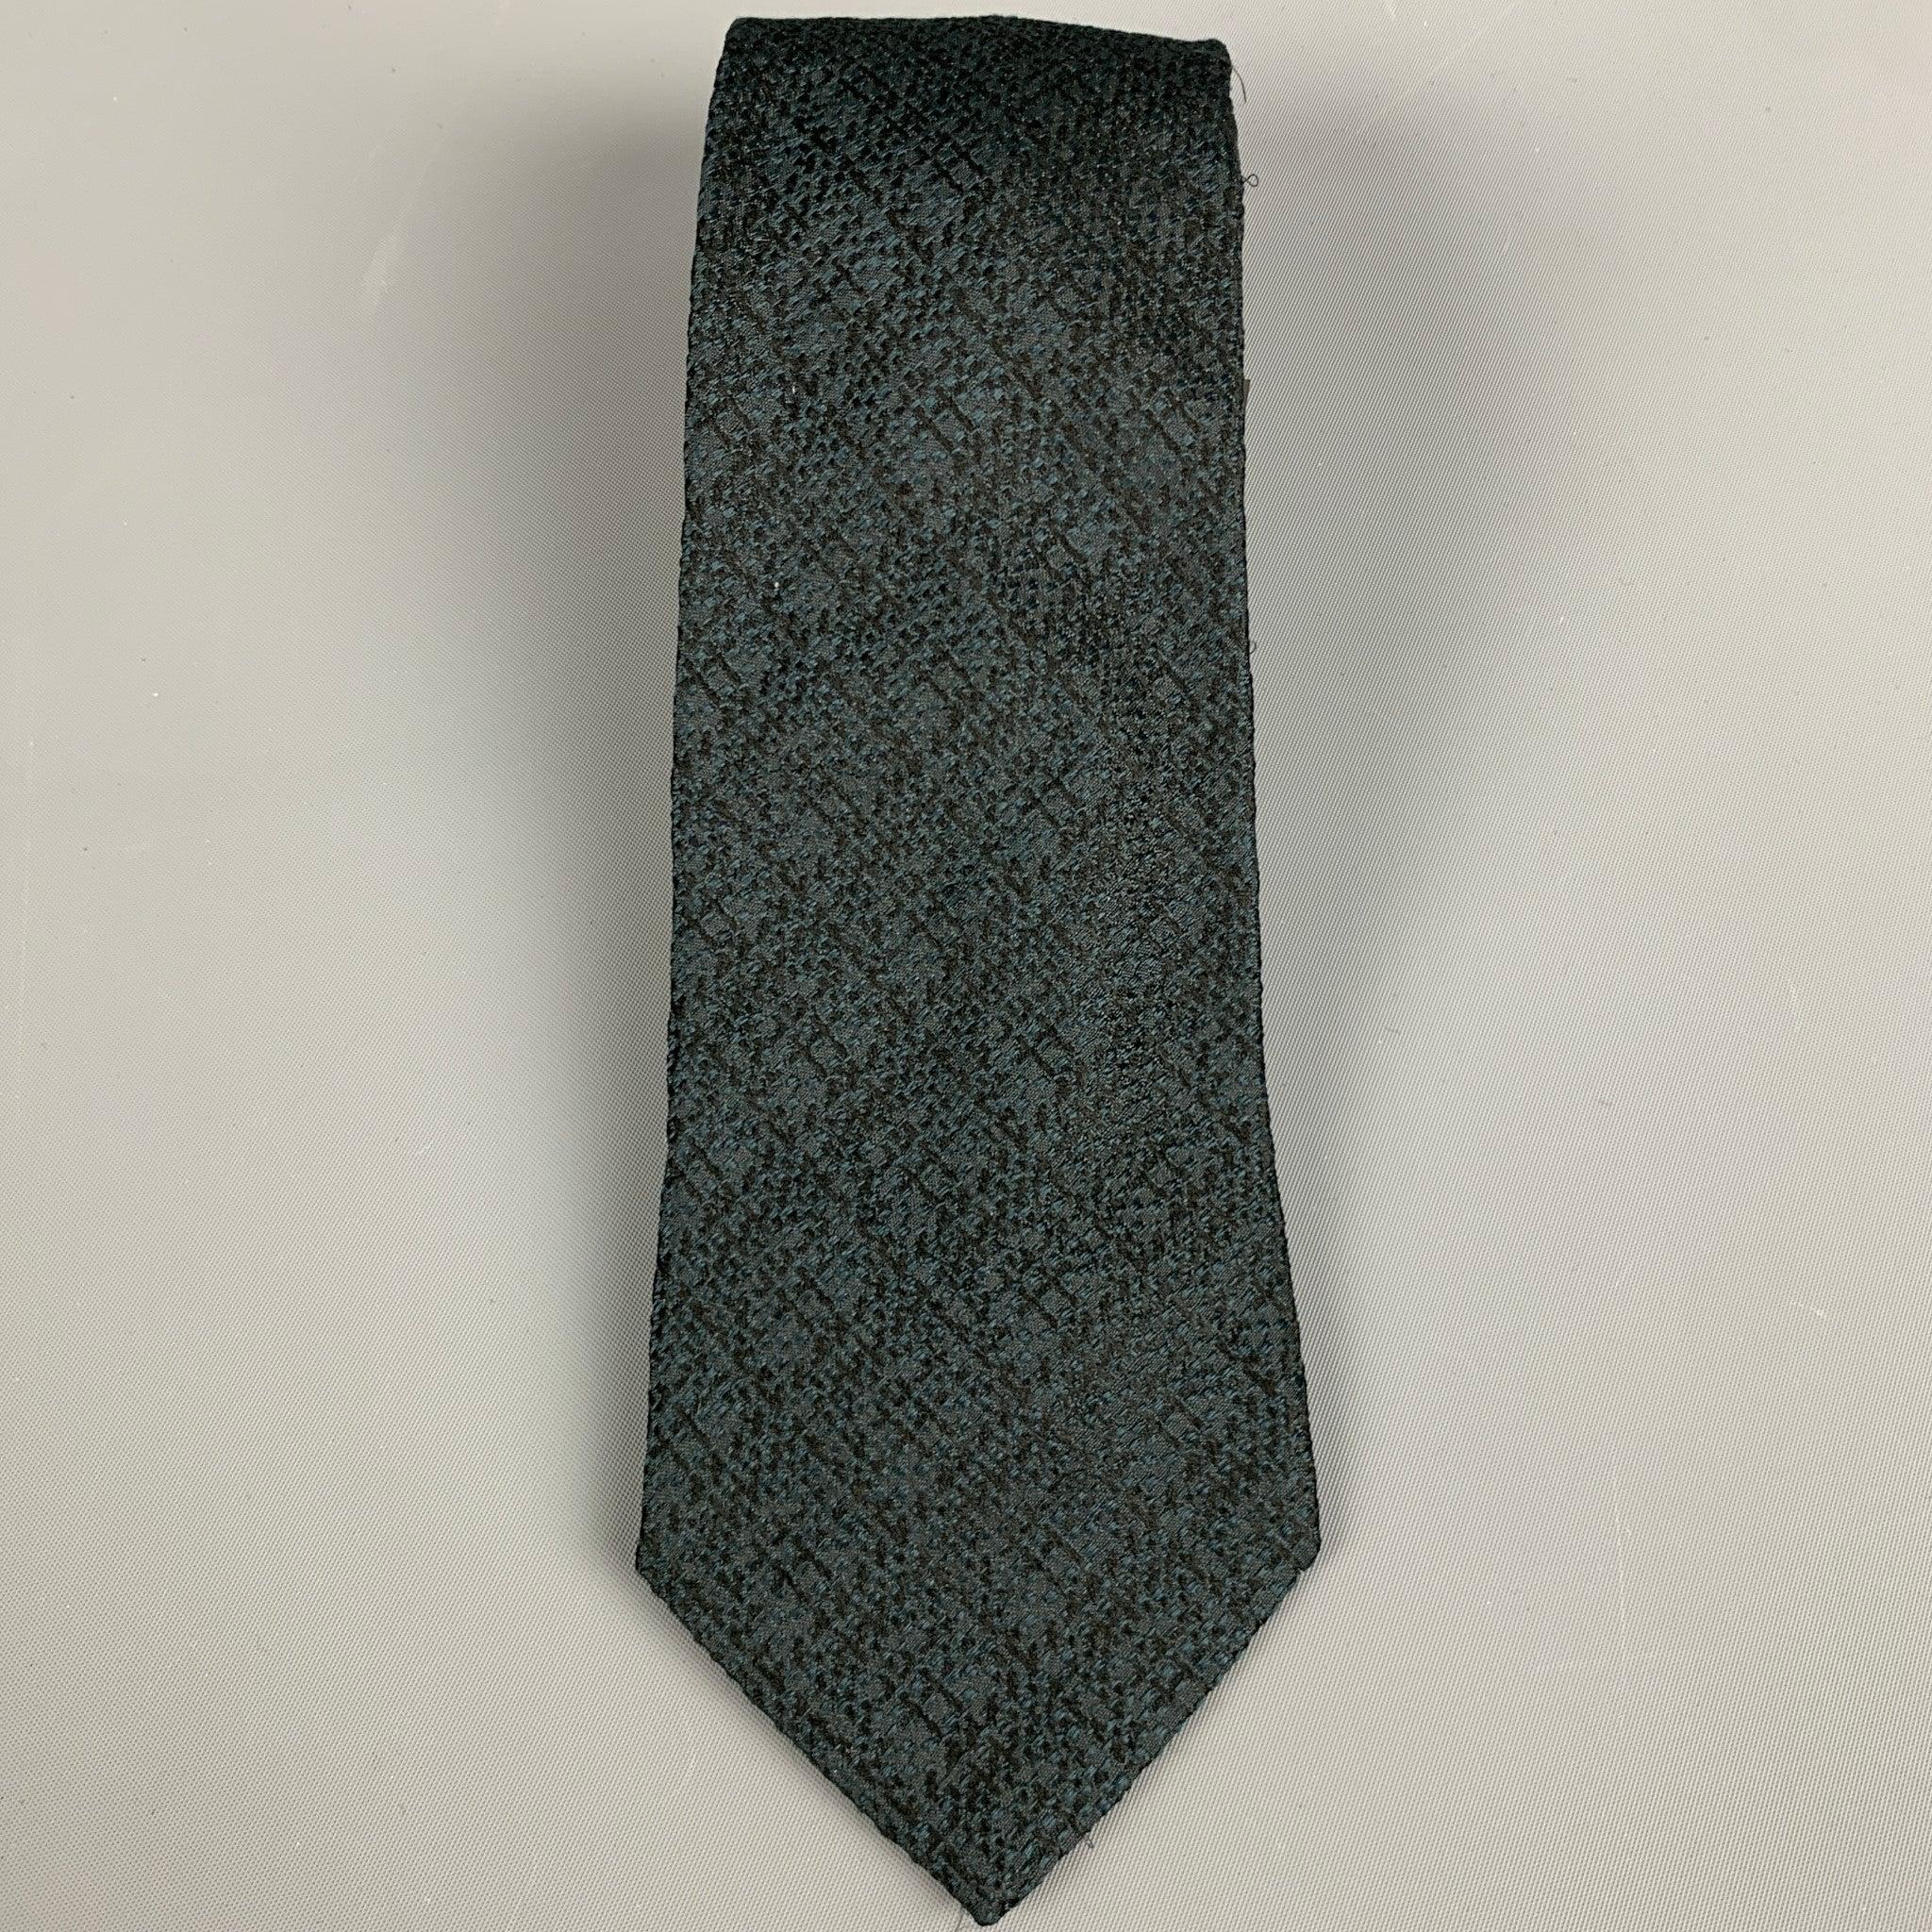 ETRO
necktie in a green and black silk fabric featuring a textured look. Made in Italy.Excellent Pre-Owned Condition. 

Measurements: 
  Width: 3 inches Length: 60 inches 
  
  
 
Reference: 127995
Category: Tie
More Details
    
Brand:  ETRO
Color: